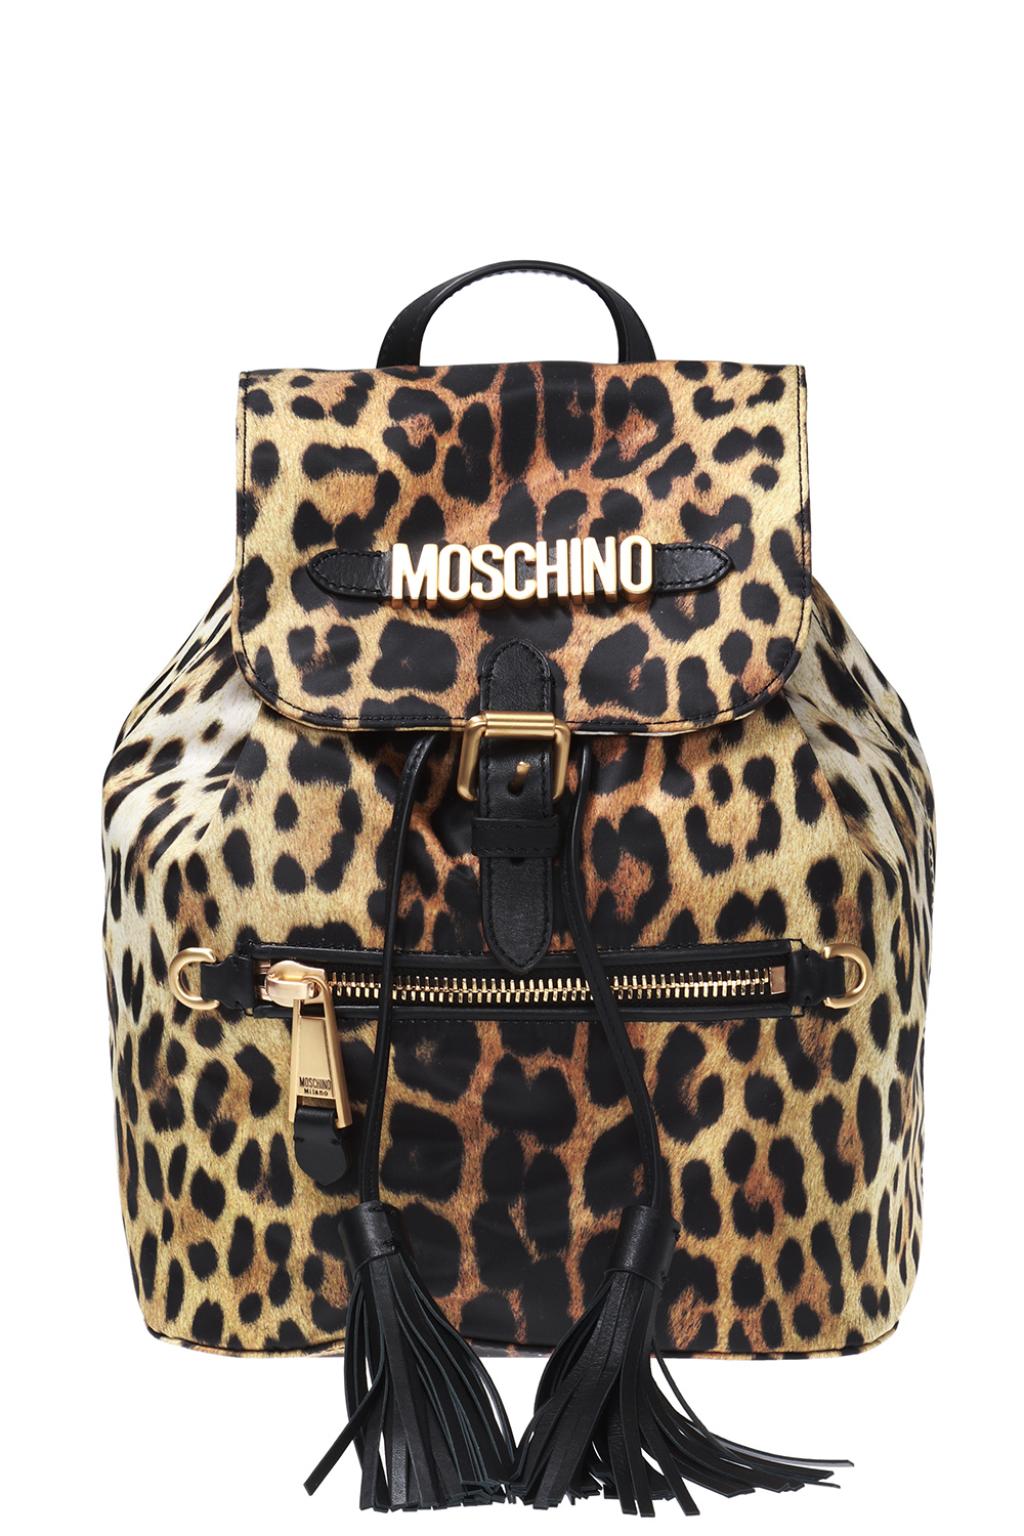 moschino leopard backpack